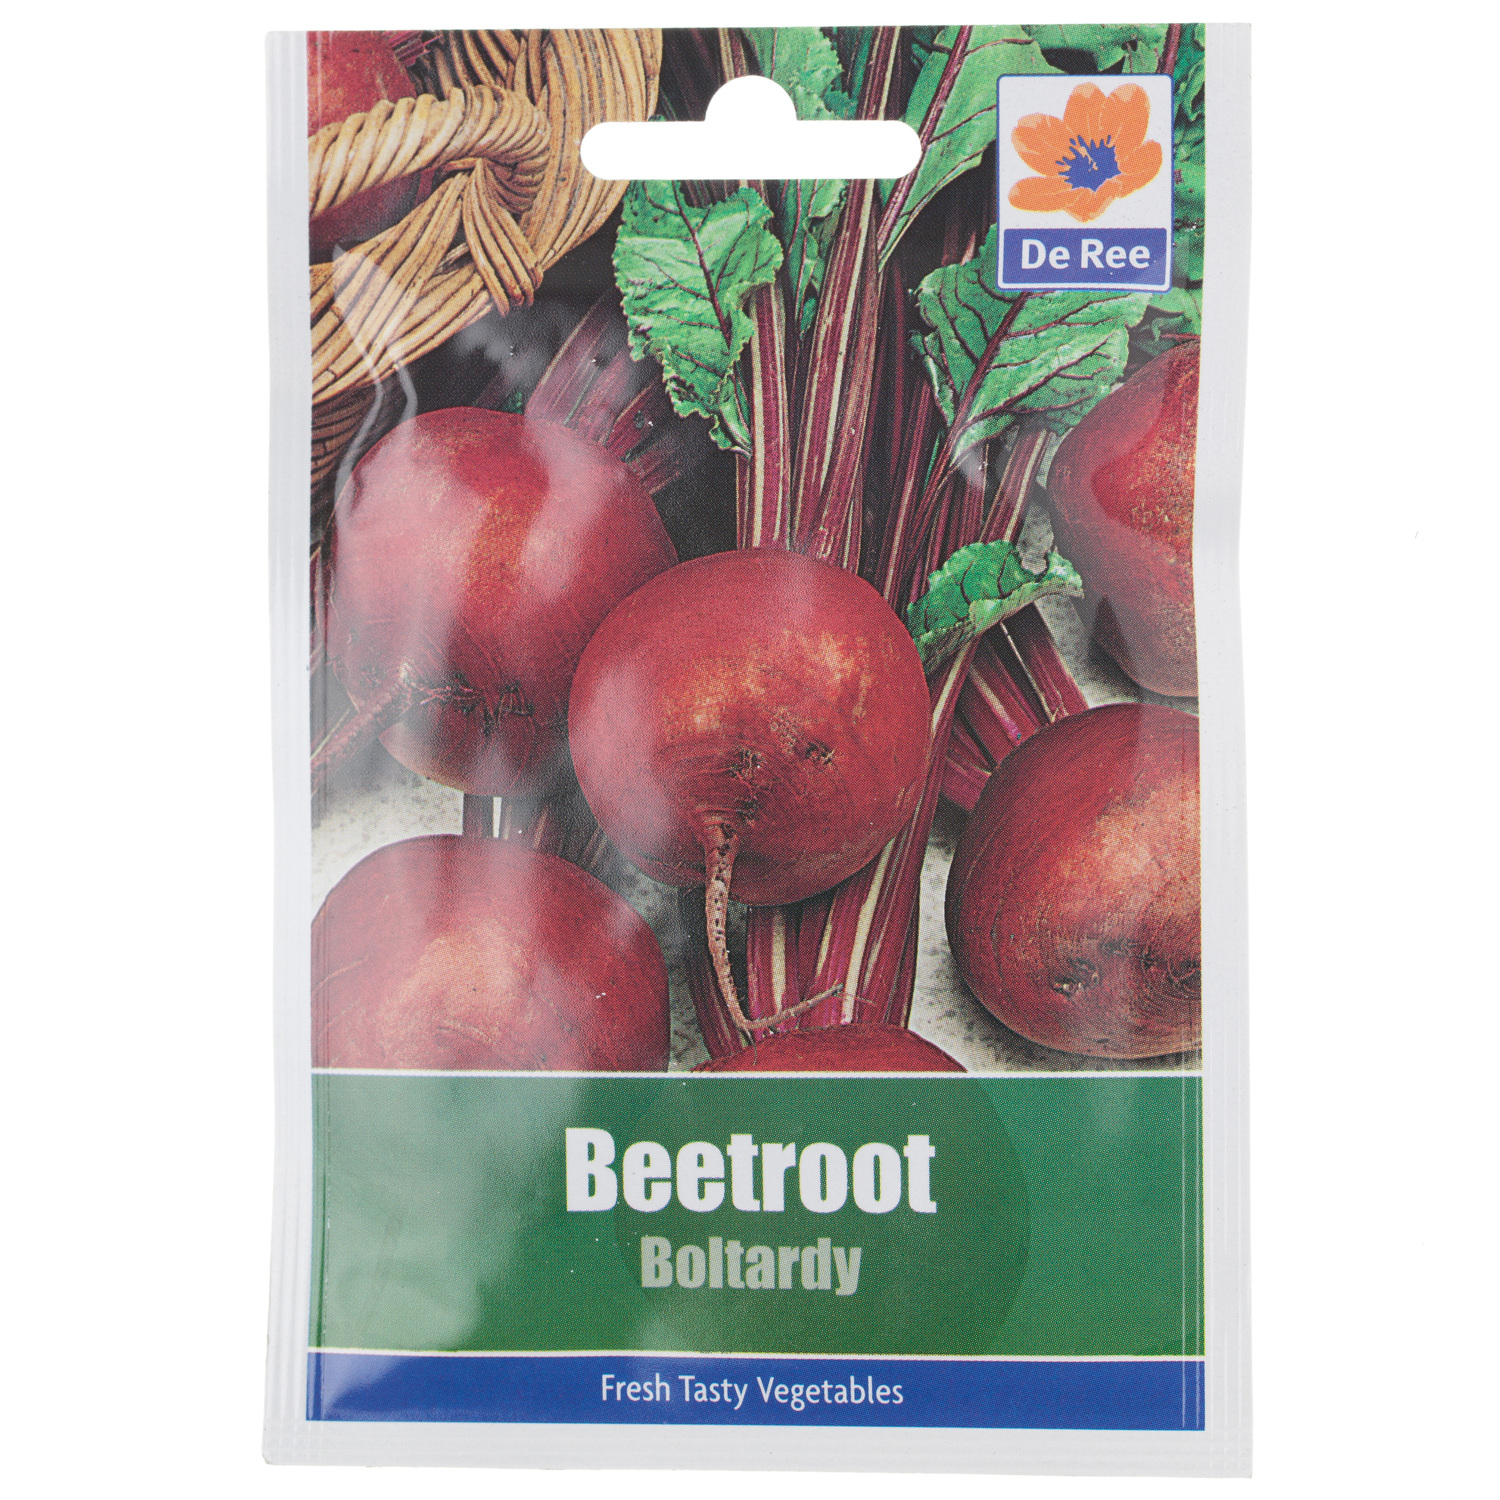 Boltardy Beetroot Seed Packet Image